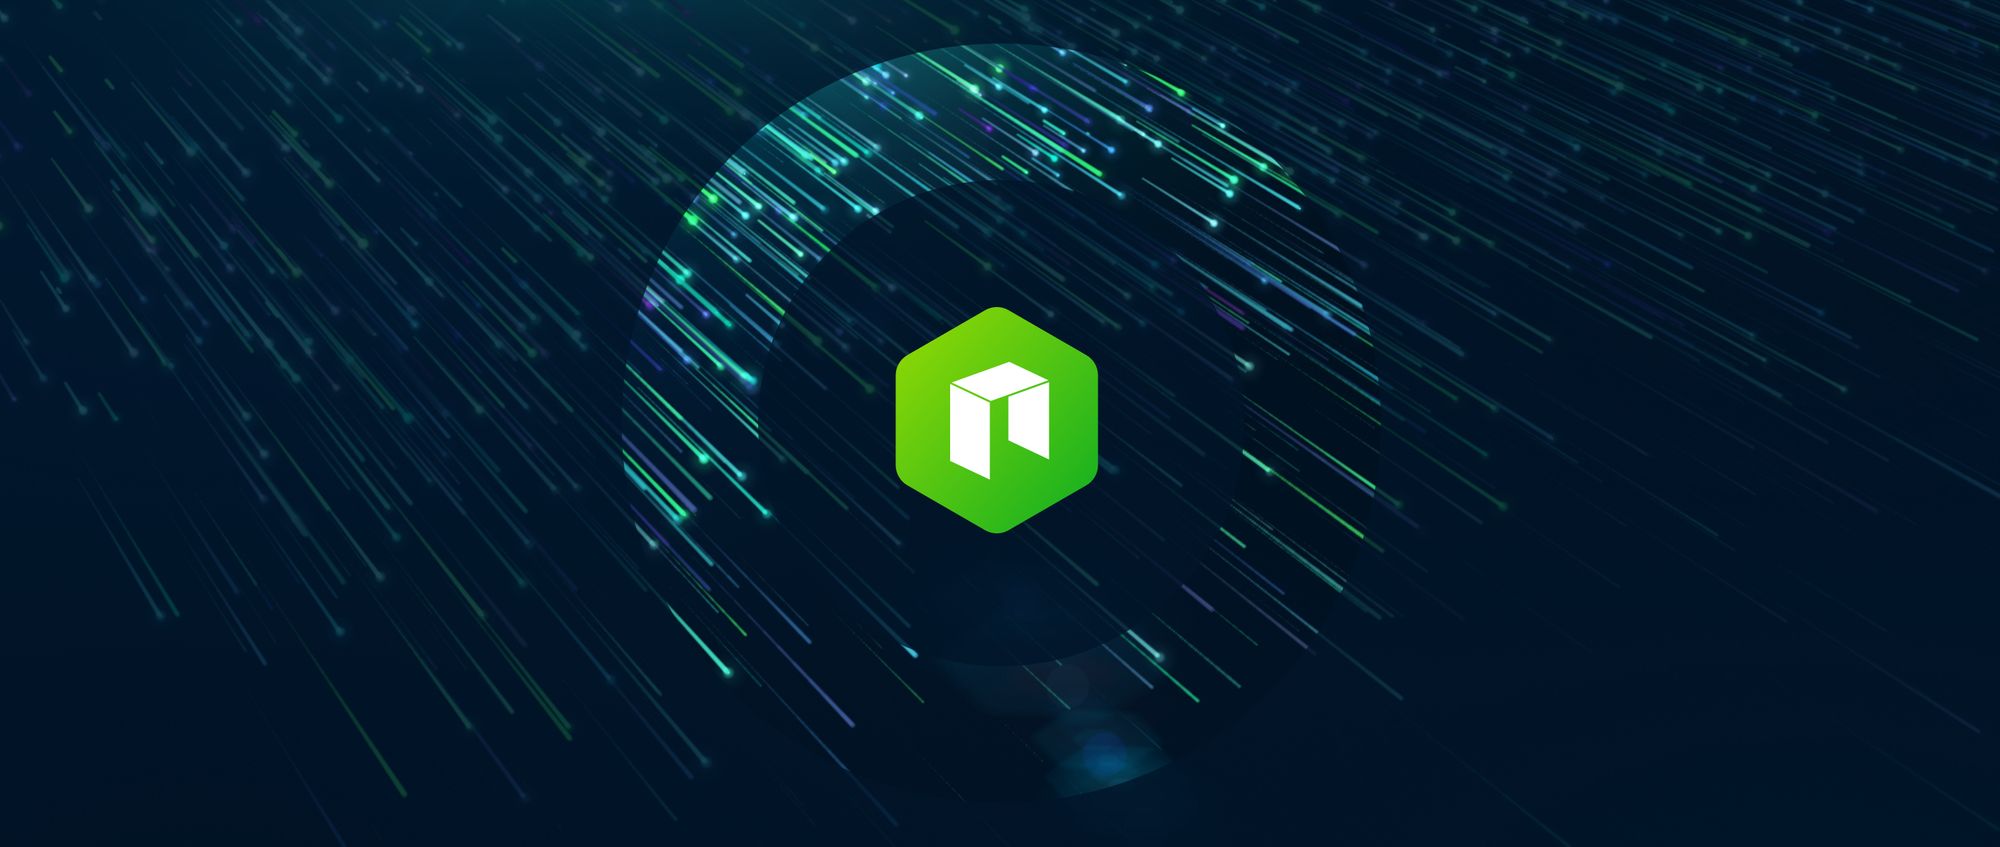 NEO Staking: How to Make Passive Income with NEO GAS | How To Mine Neo